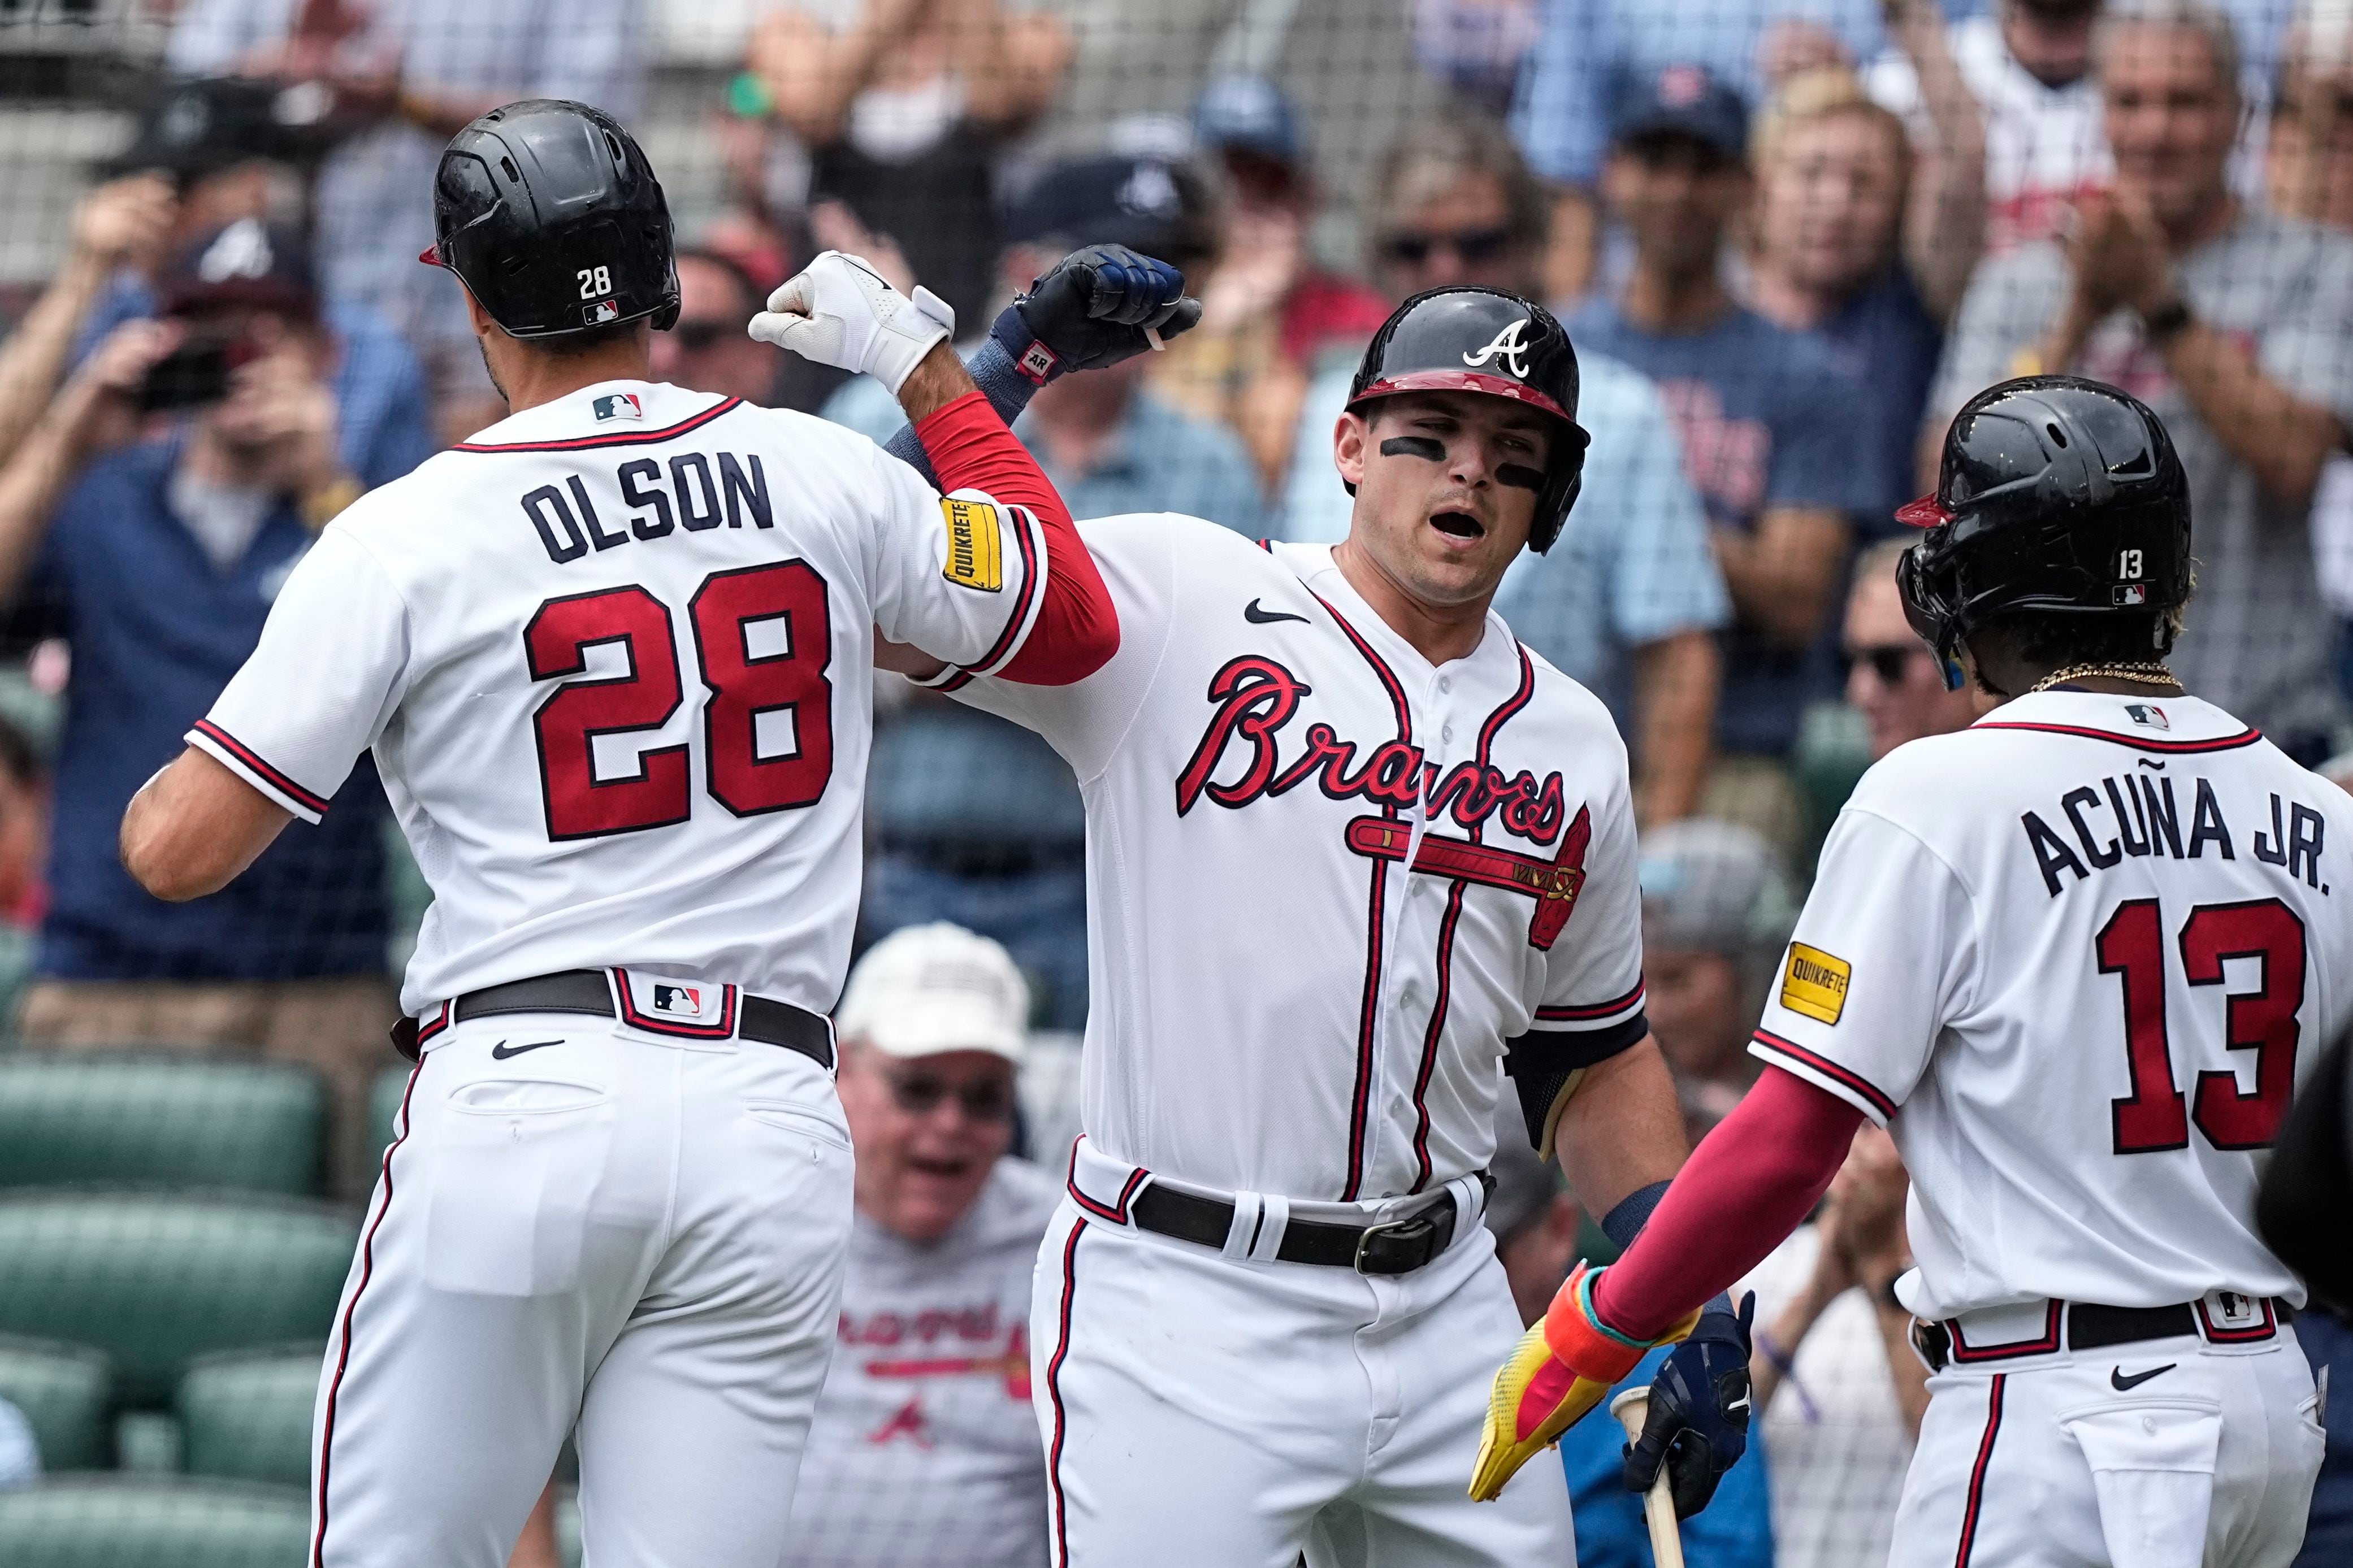 Two pitchers will share Braves' closer's role